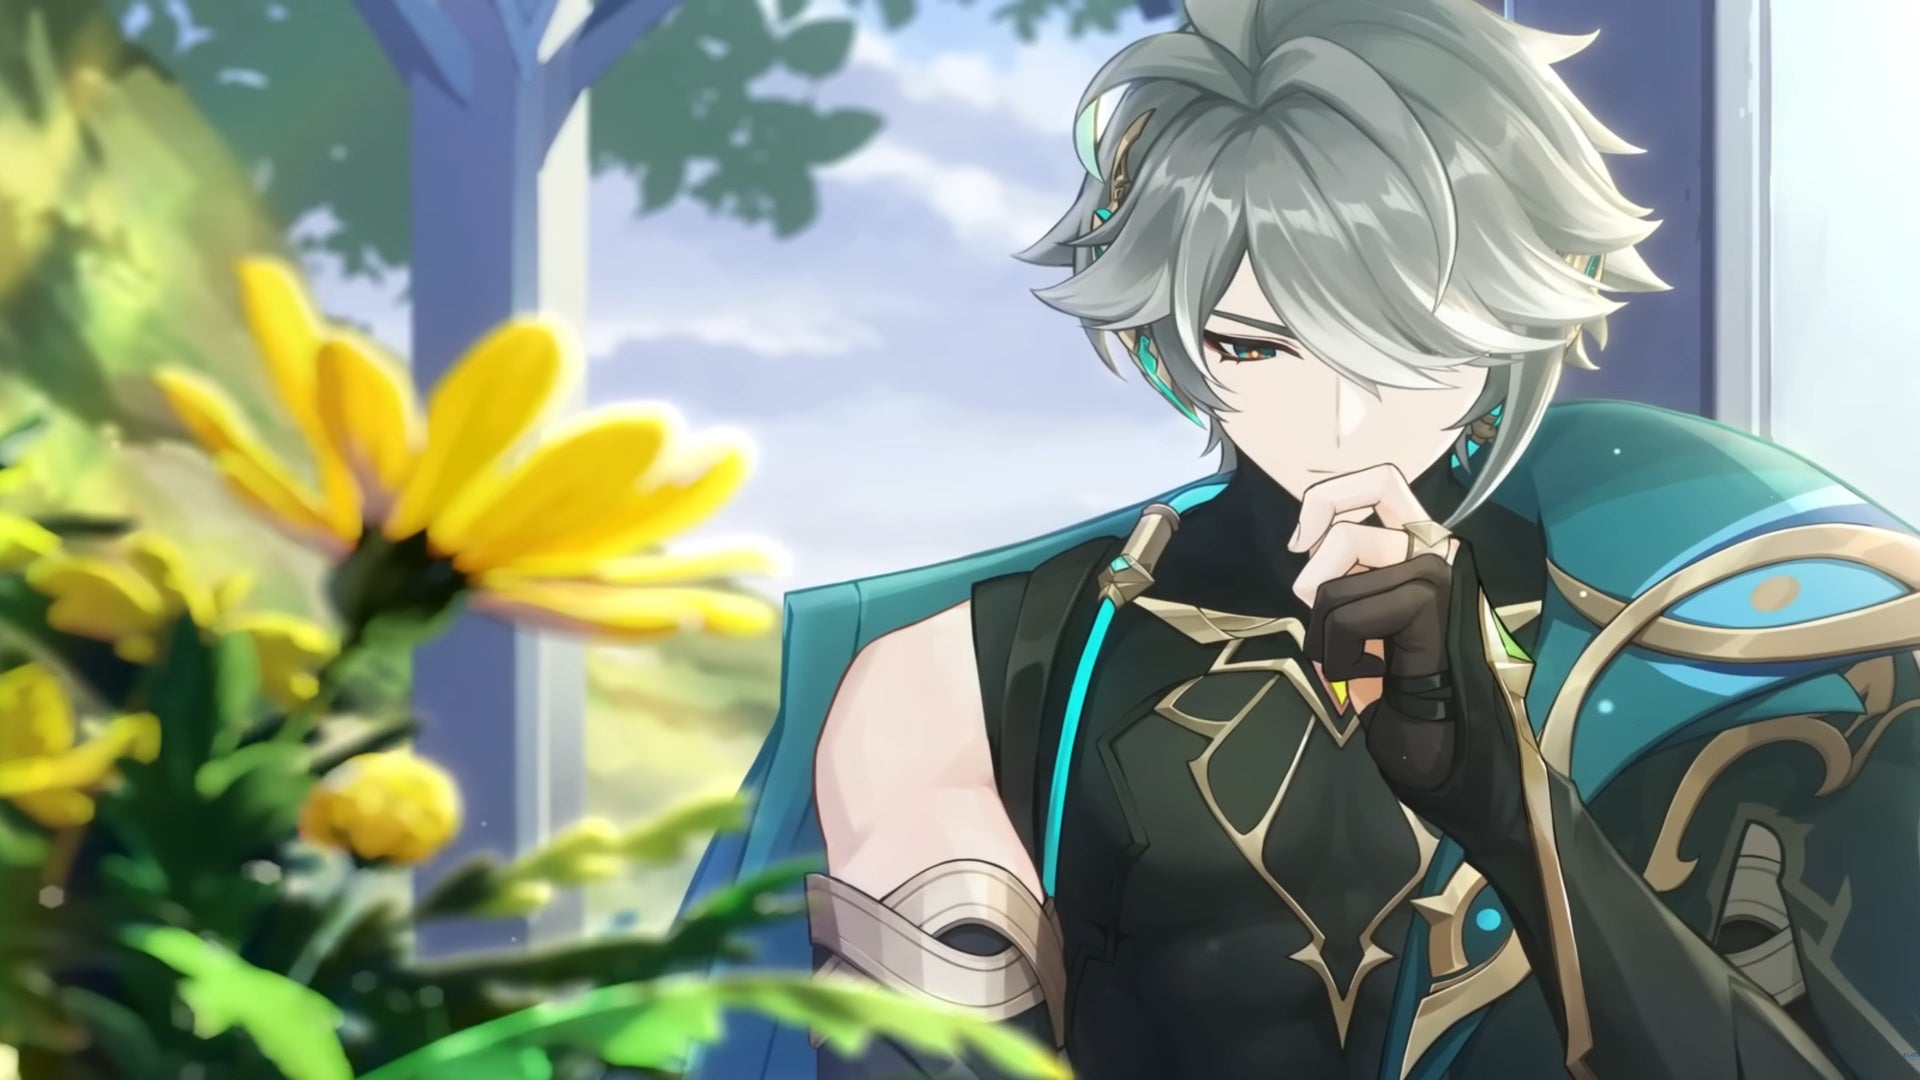 Genshin Impact Alhaitham build: An anime man with short silver hair, wearing a black tunic with a green cape, is standing next to a yellow flower and wearing a thoughtful expression on his face